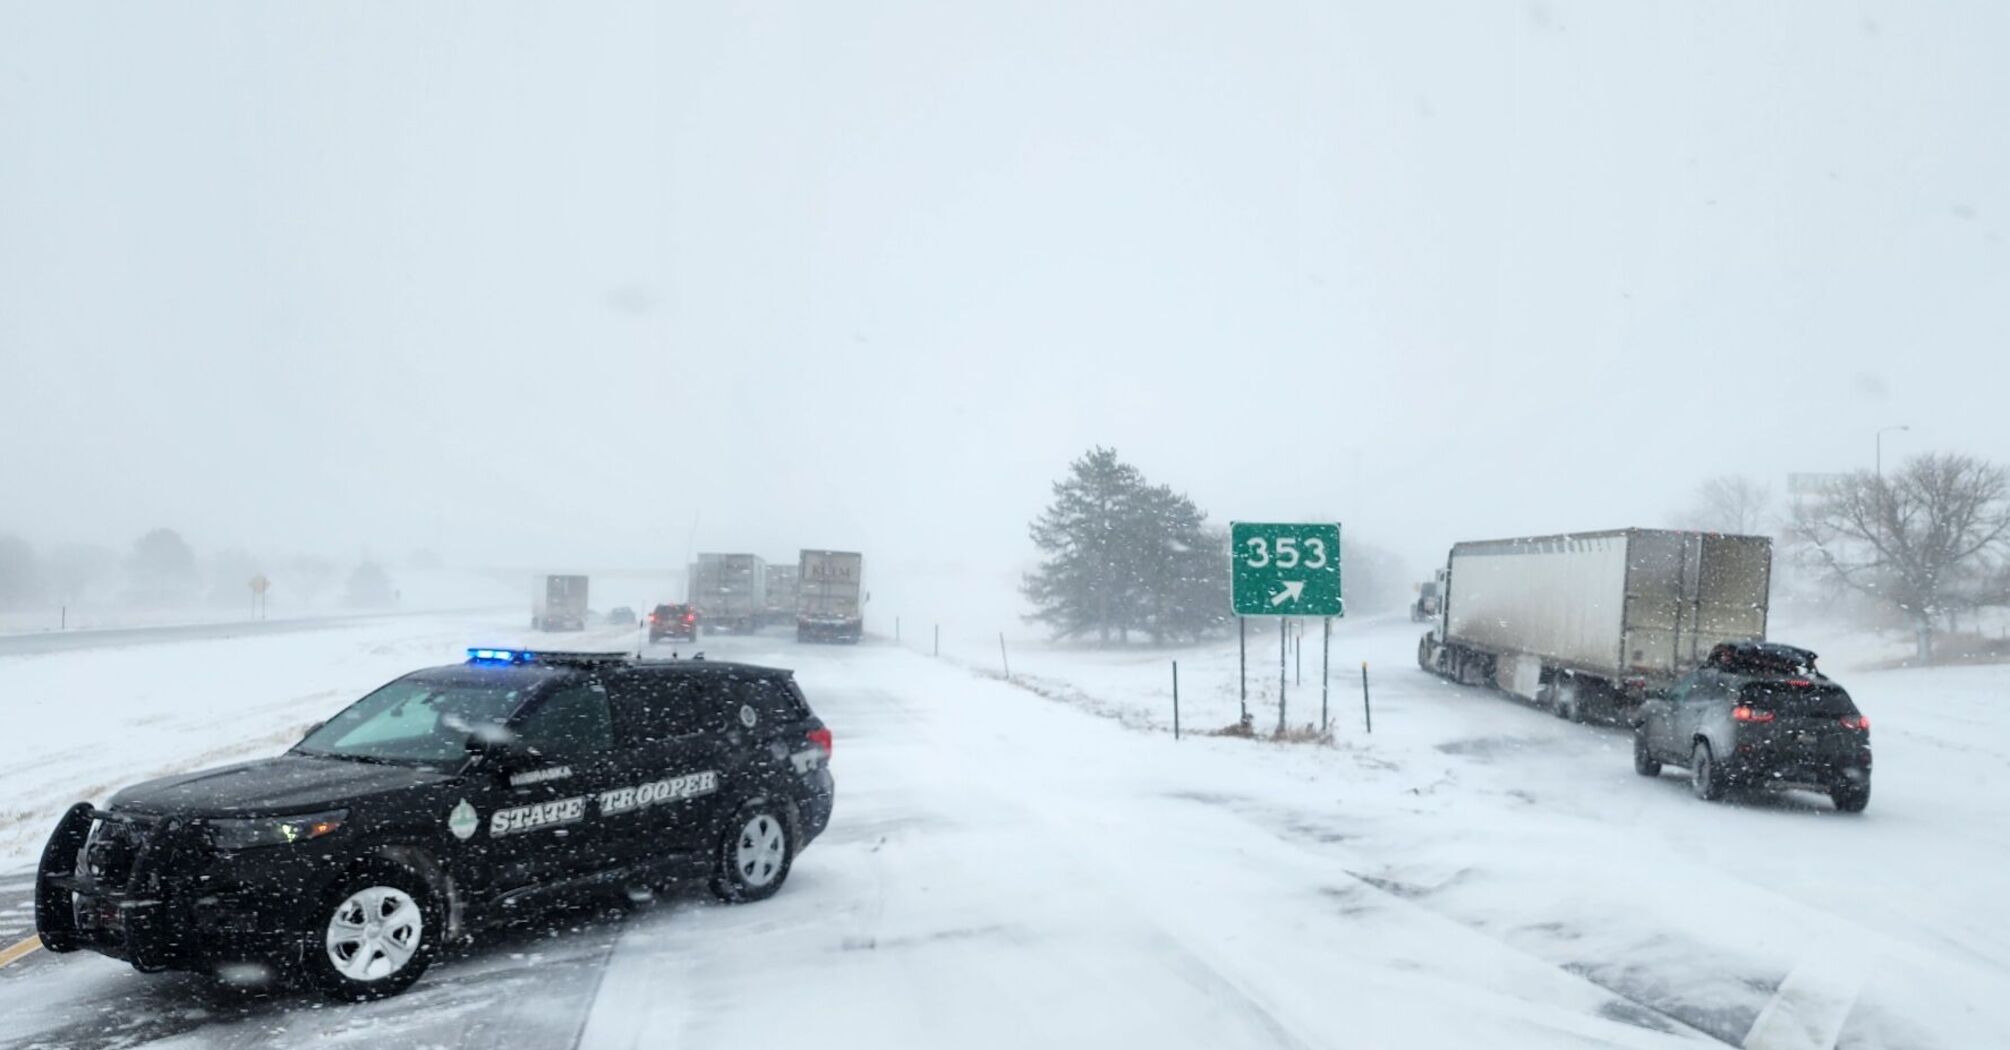 Winter storm Donavan hits northern and central US, leaving traffic hampered